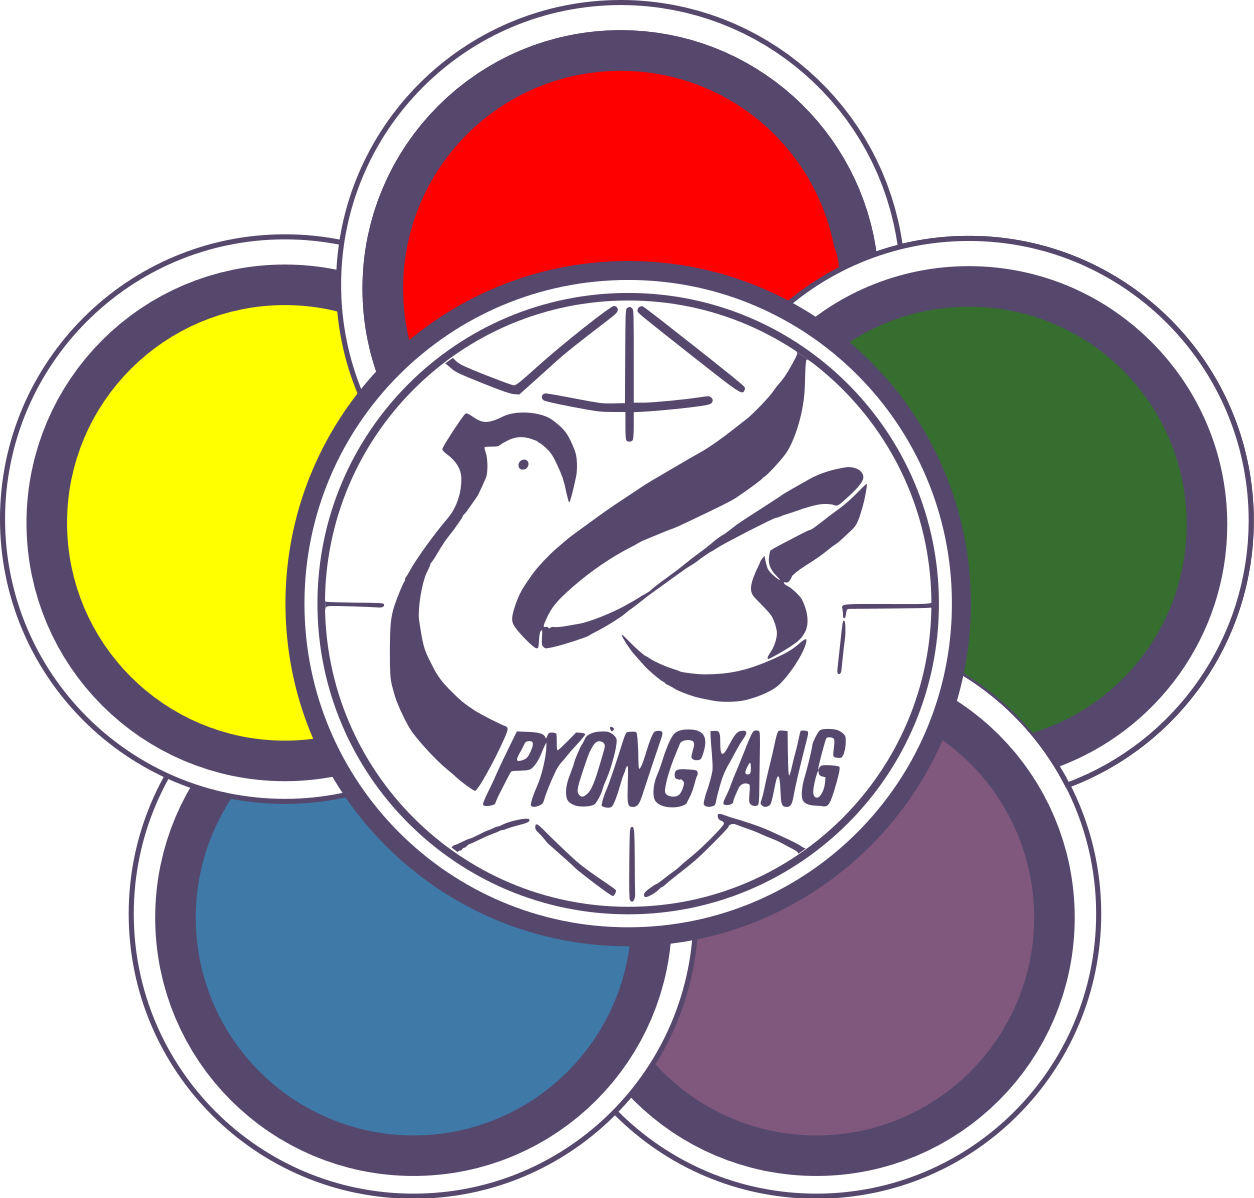 logo of the 13th World Festival of Youths and Students which was held in Pyongyang in July 1989